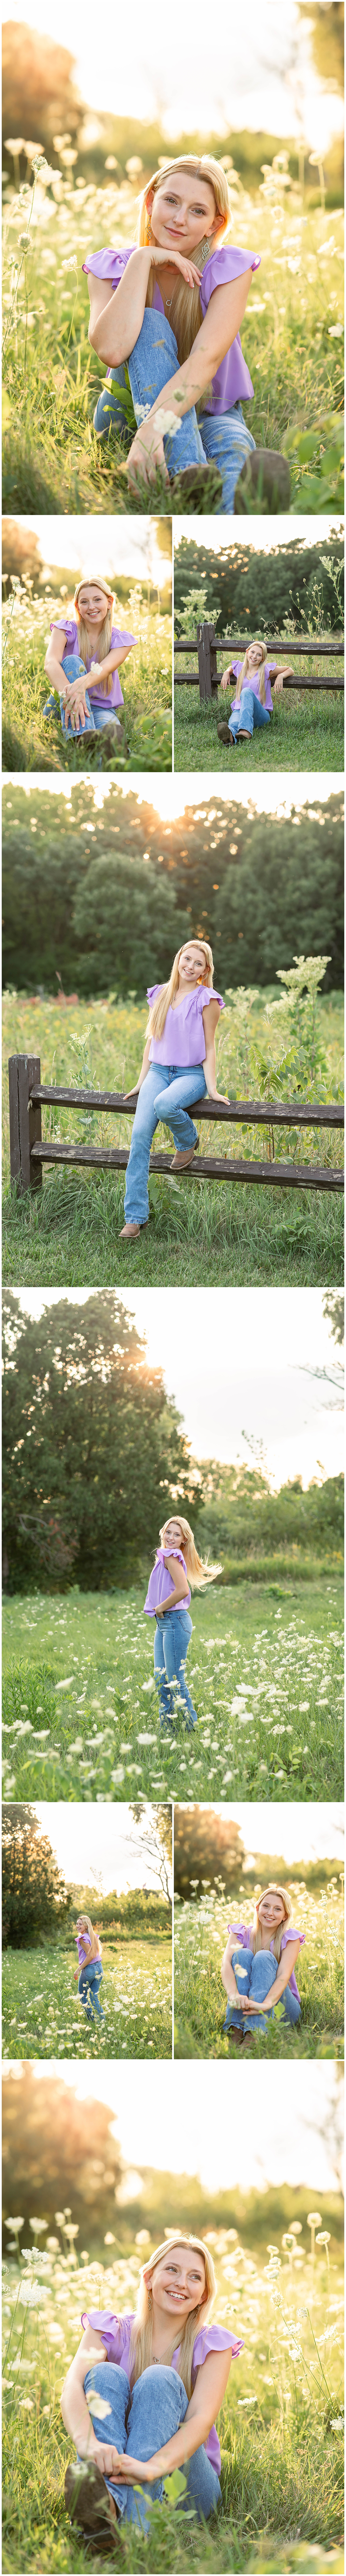 DeForest Senior Session at Token Creek with girl in pale purple top and cowgirl boots sitting in tall grasses and leaning on wood fence